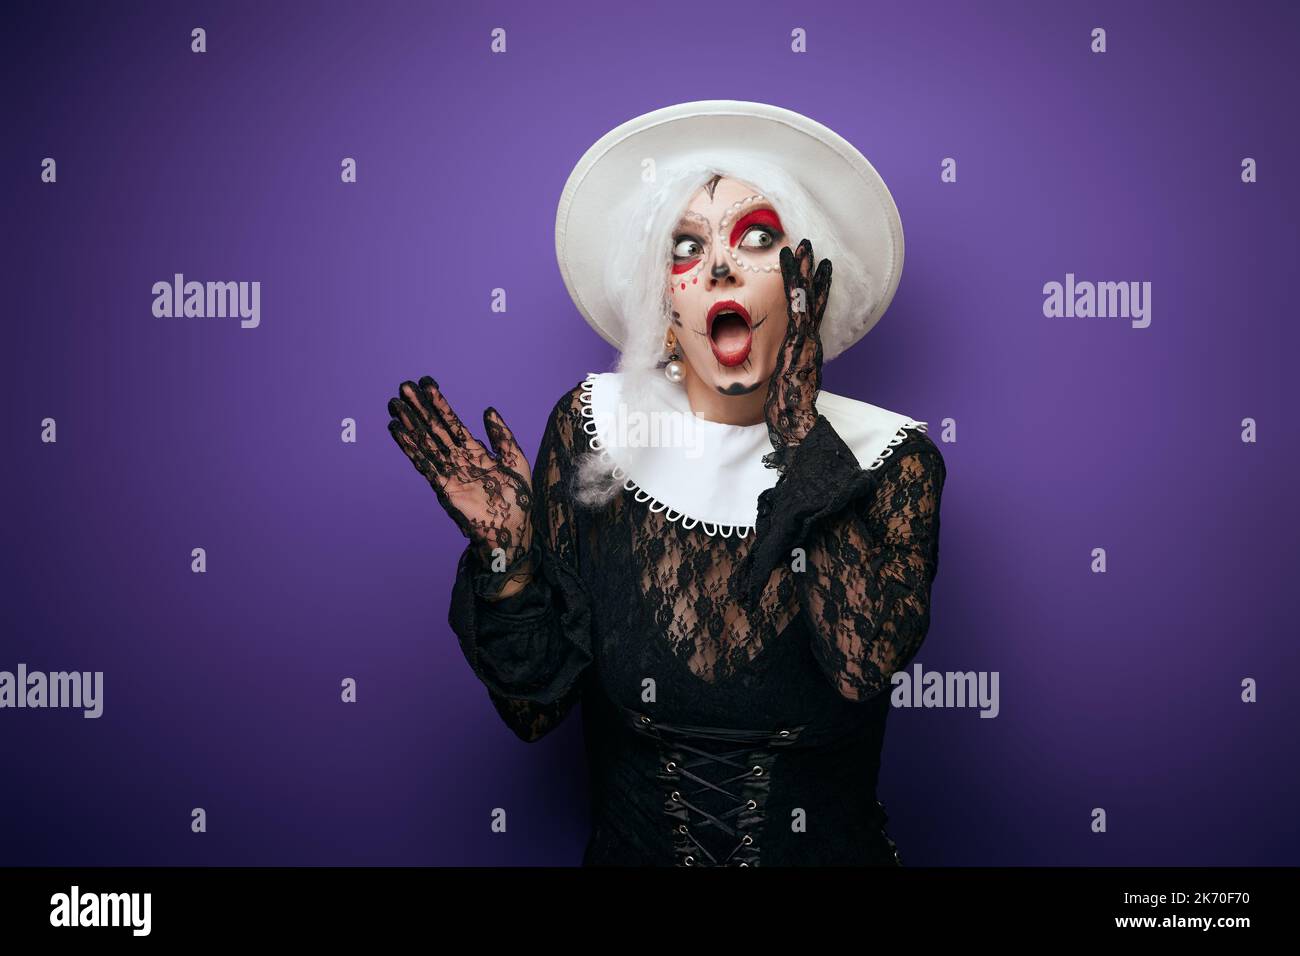 Scared whispering woman with grey hair in Halloween costume Stock Photo